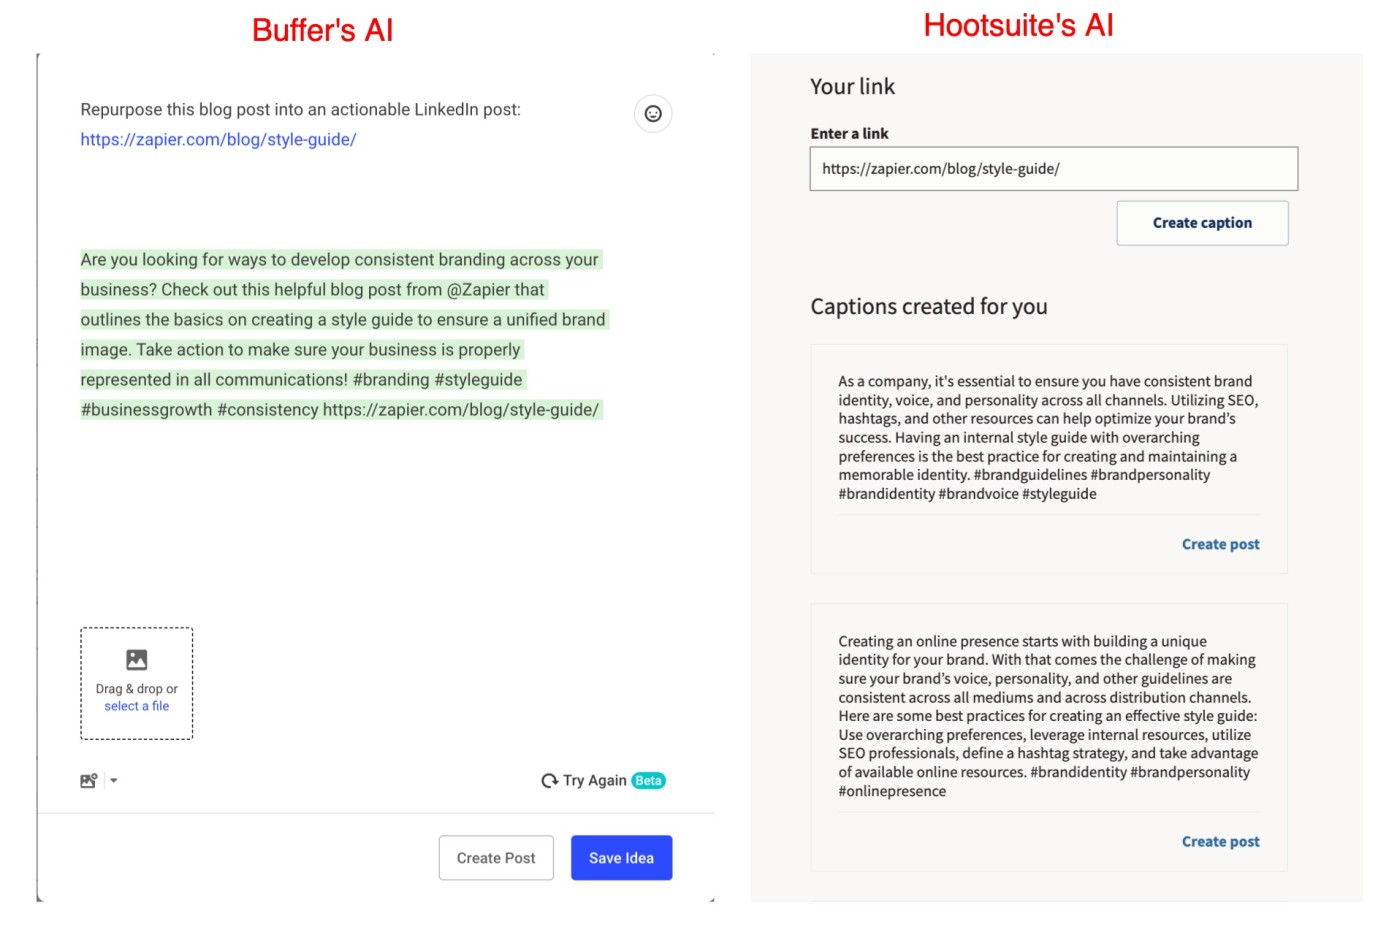 Side-by-side examples of the generative AI output from Buffer and Hootsuite